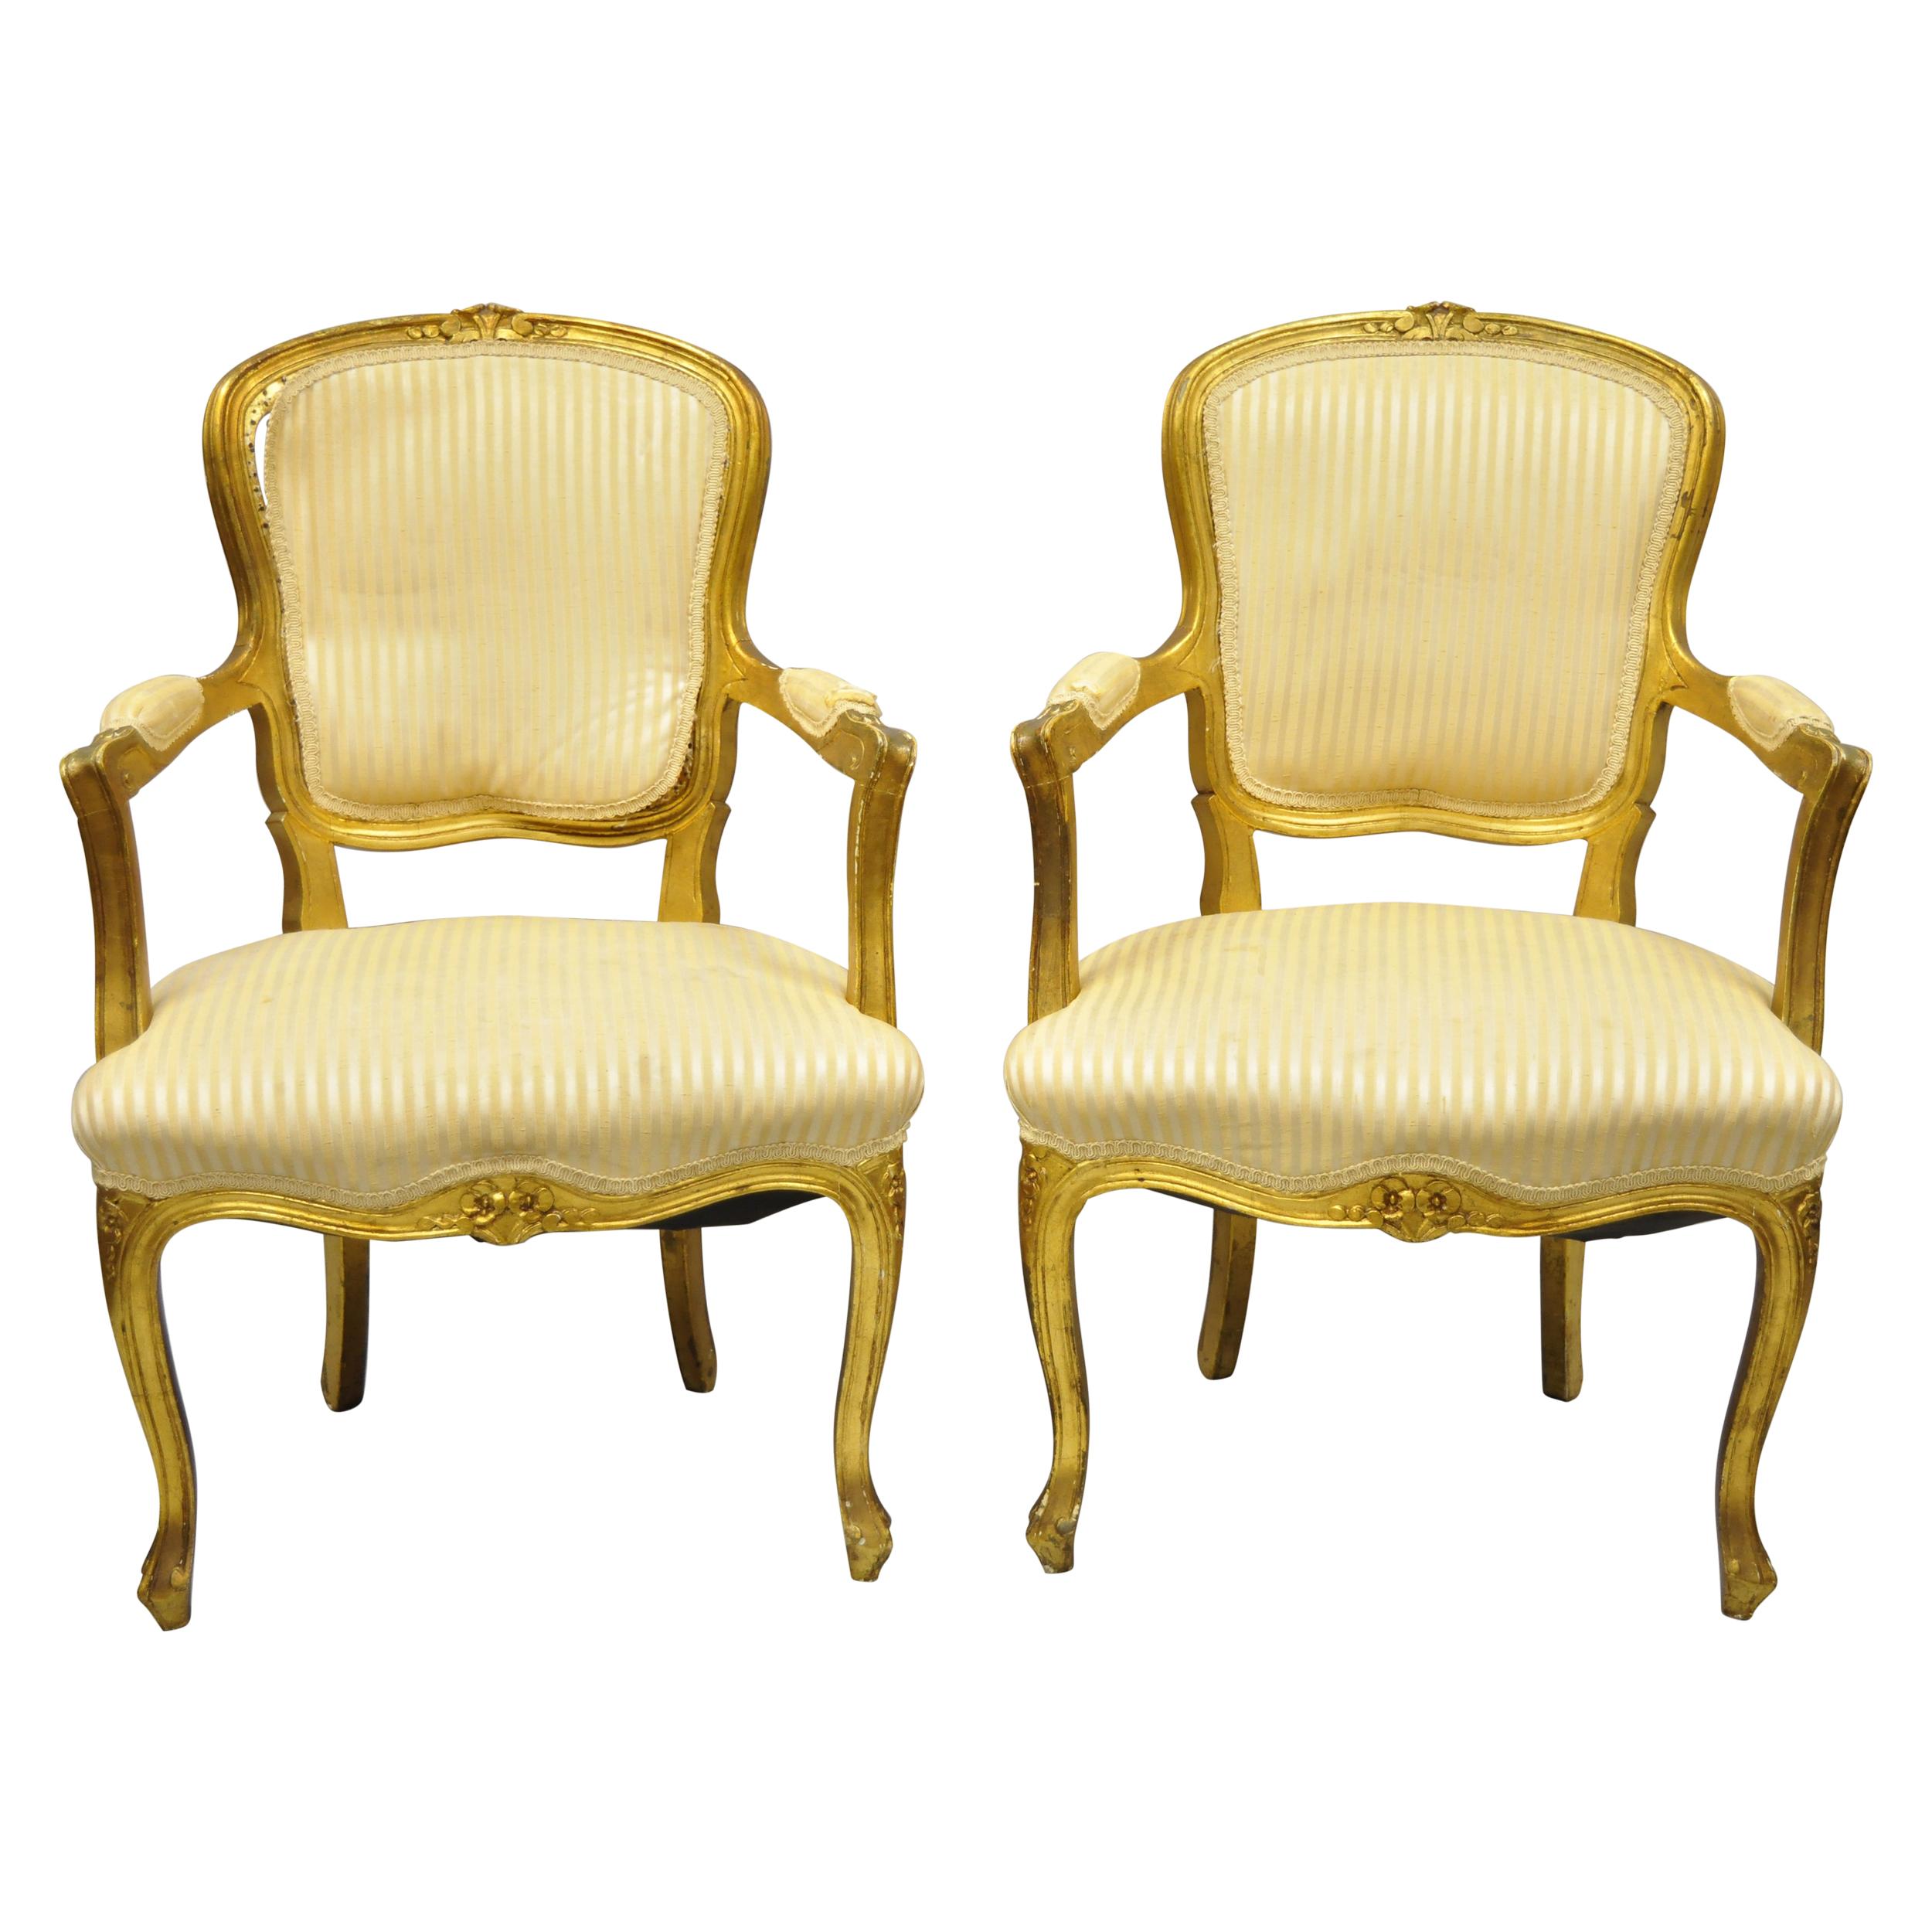 French Louis XV Style Gold Gilt Fauteuil Arm Chairs to Refinish DIY, a Pair For Sale